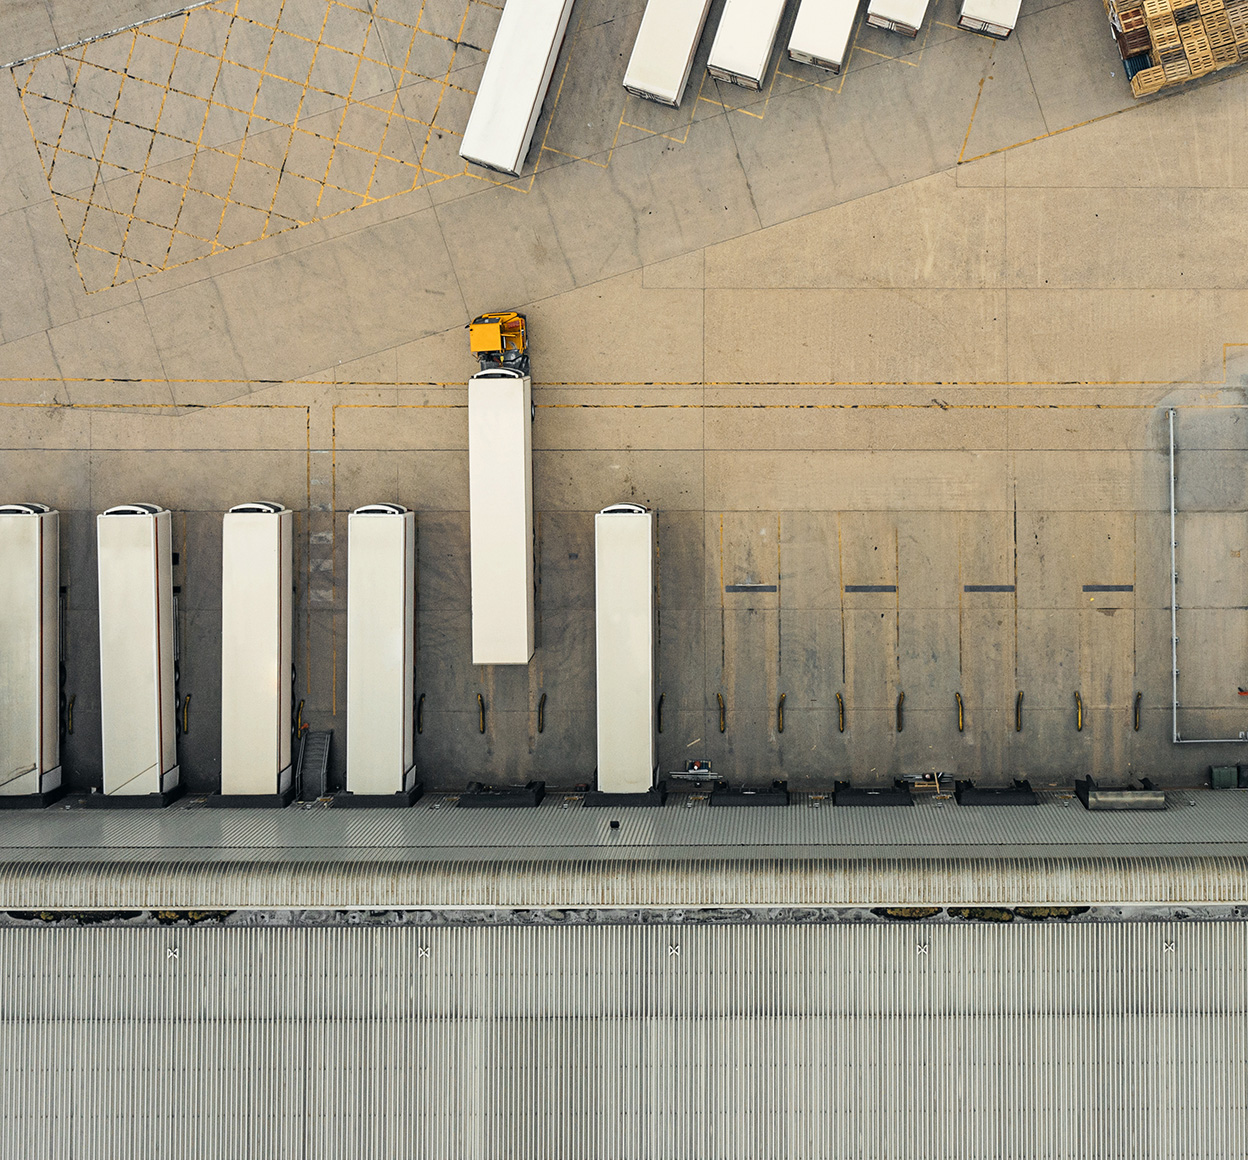 Overhead photo of trucks at a distribution center